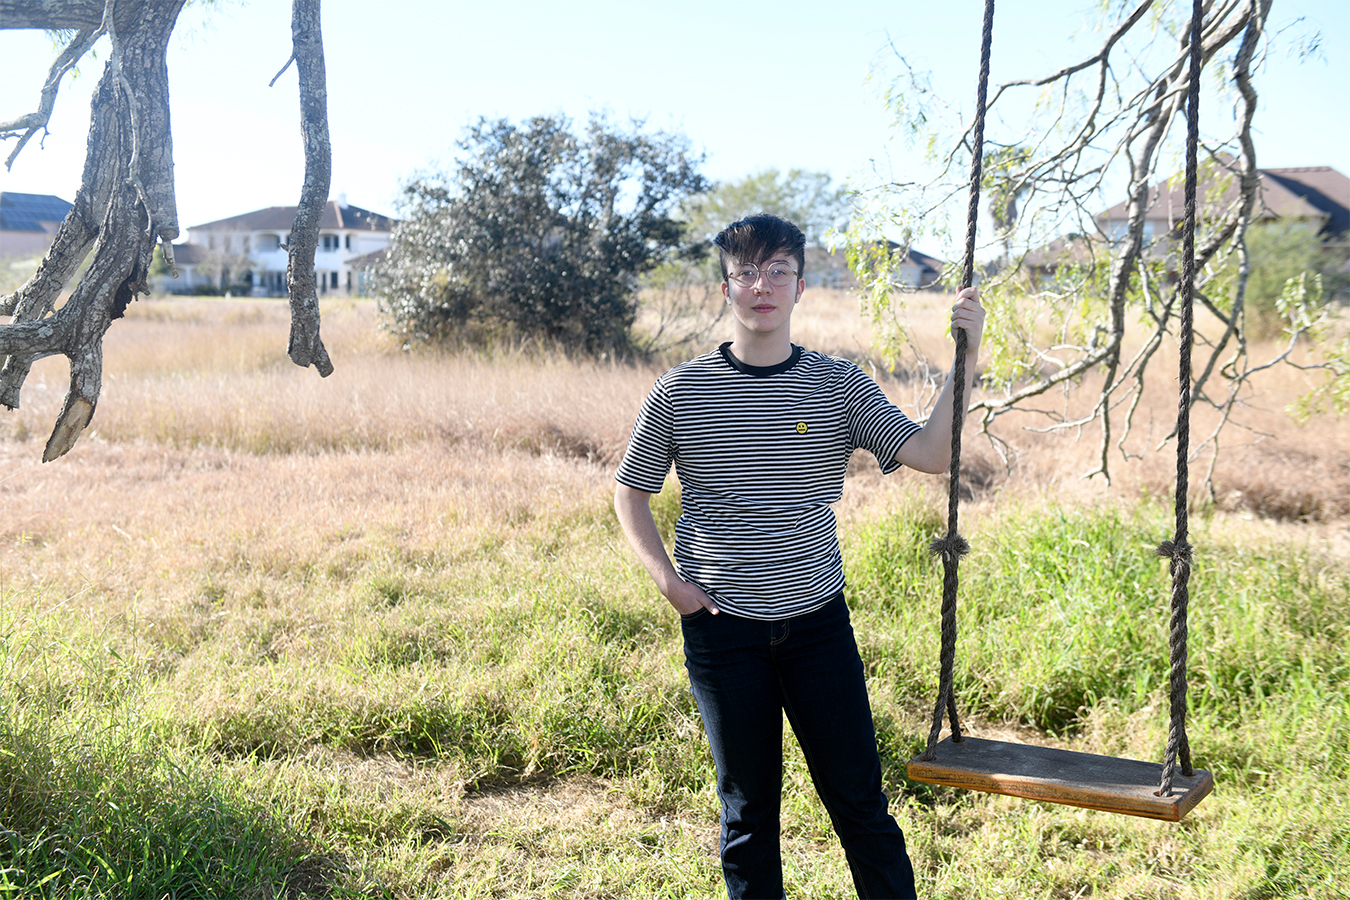 Charlie Apple stands next to a swing outside his home in Corpus Christie, Texas.